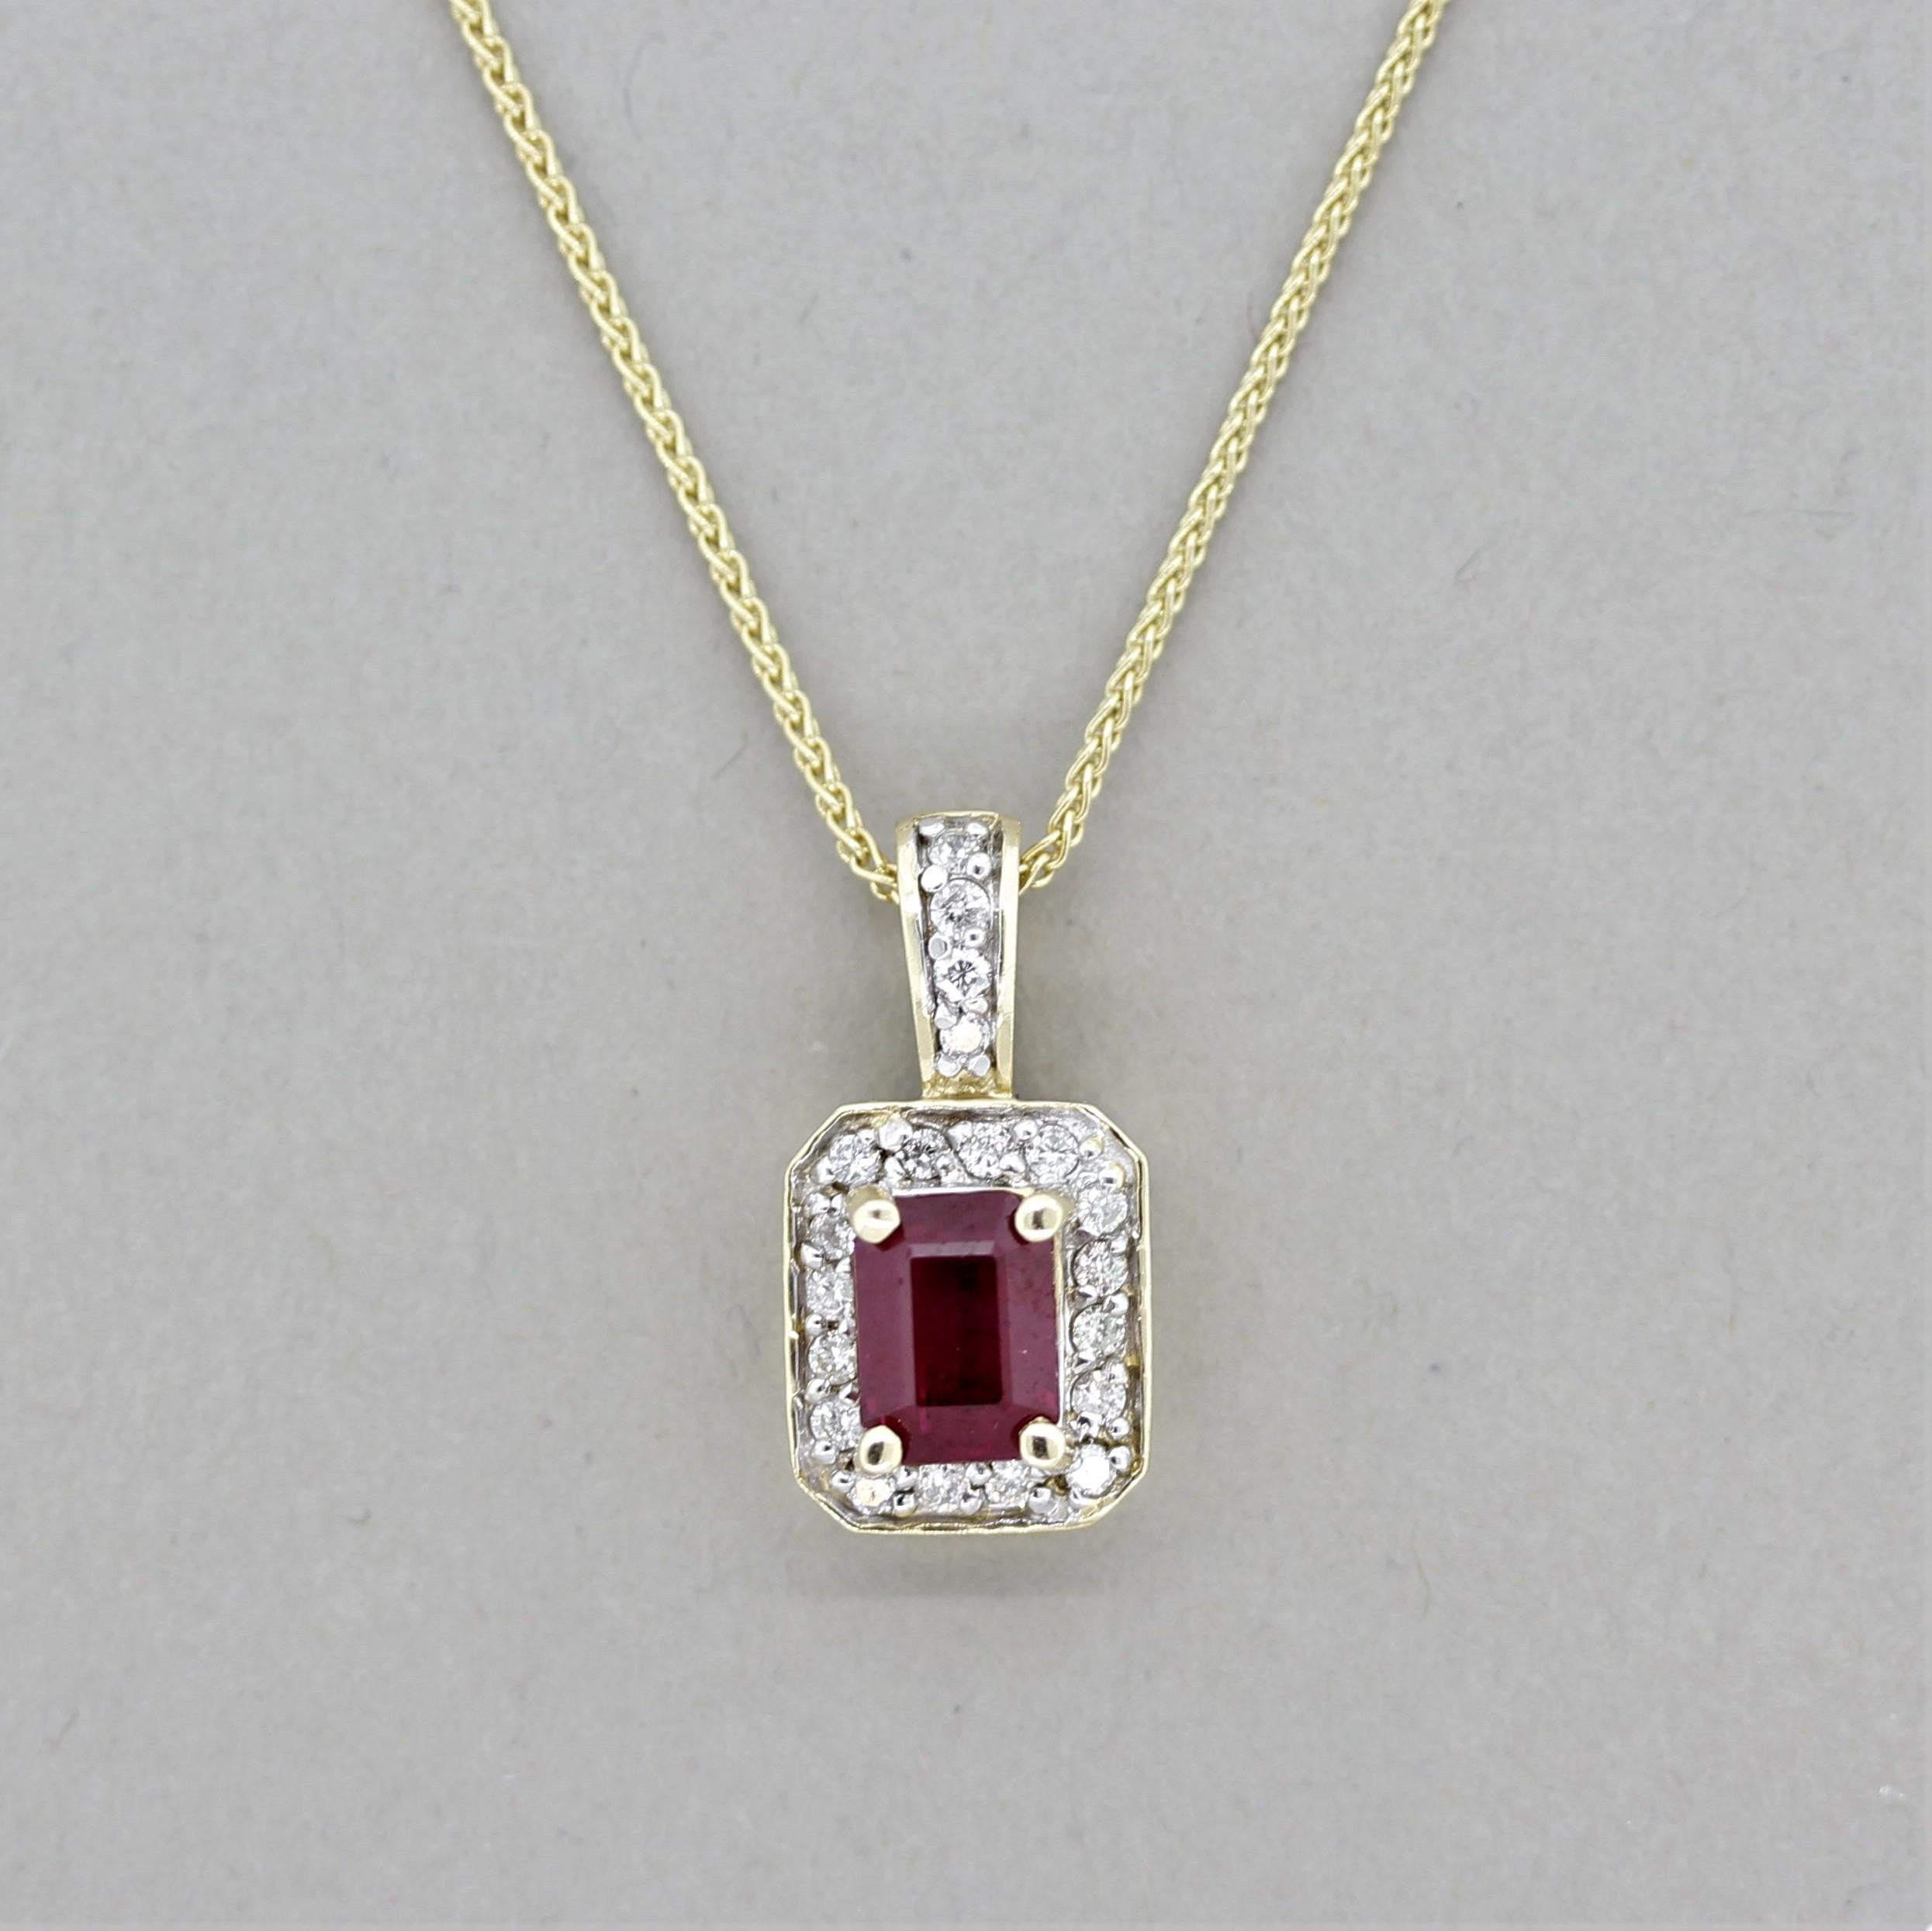 A simple yet elegant pendant featuring a 1.27 carat emerald-cut ruby. It has a classic vivid red color, also known as “pigeon’s blood” which is given to high saturated red rubies such as this example. It is accented by 0.21 carats of round